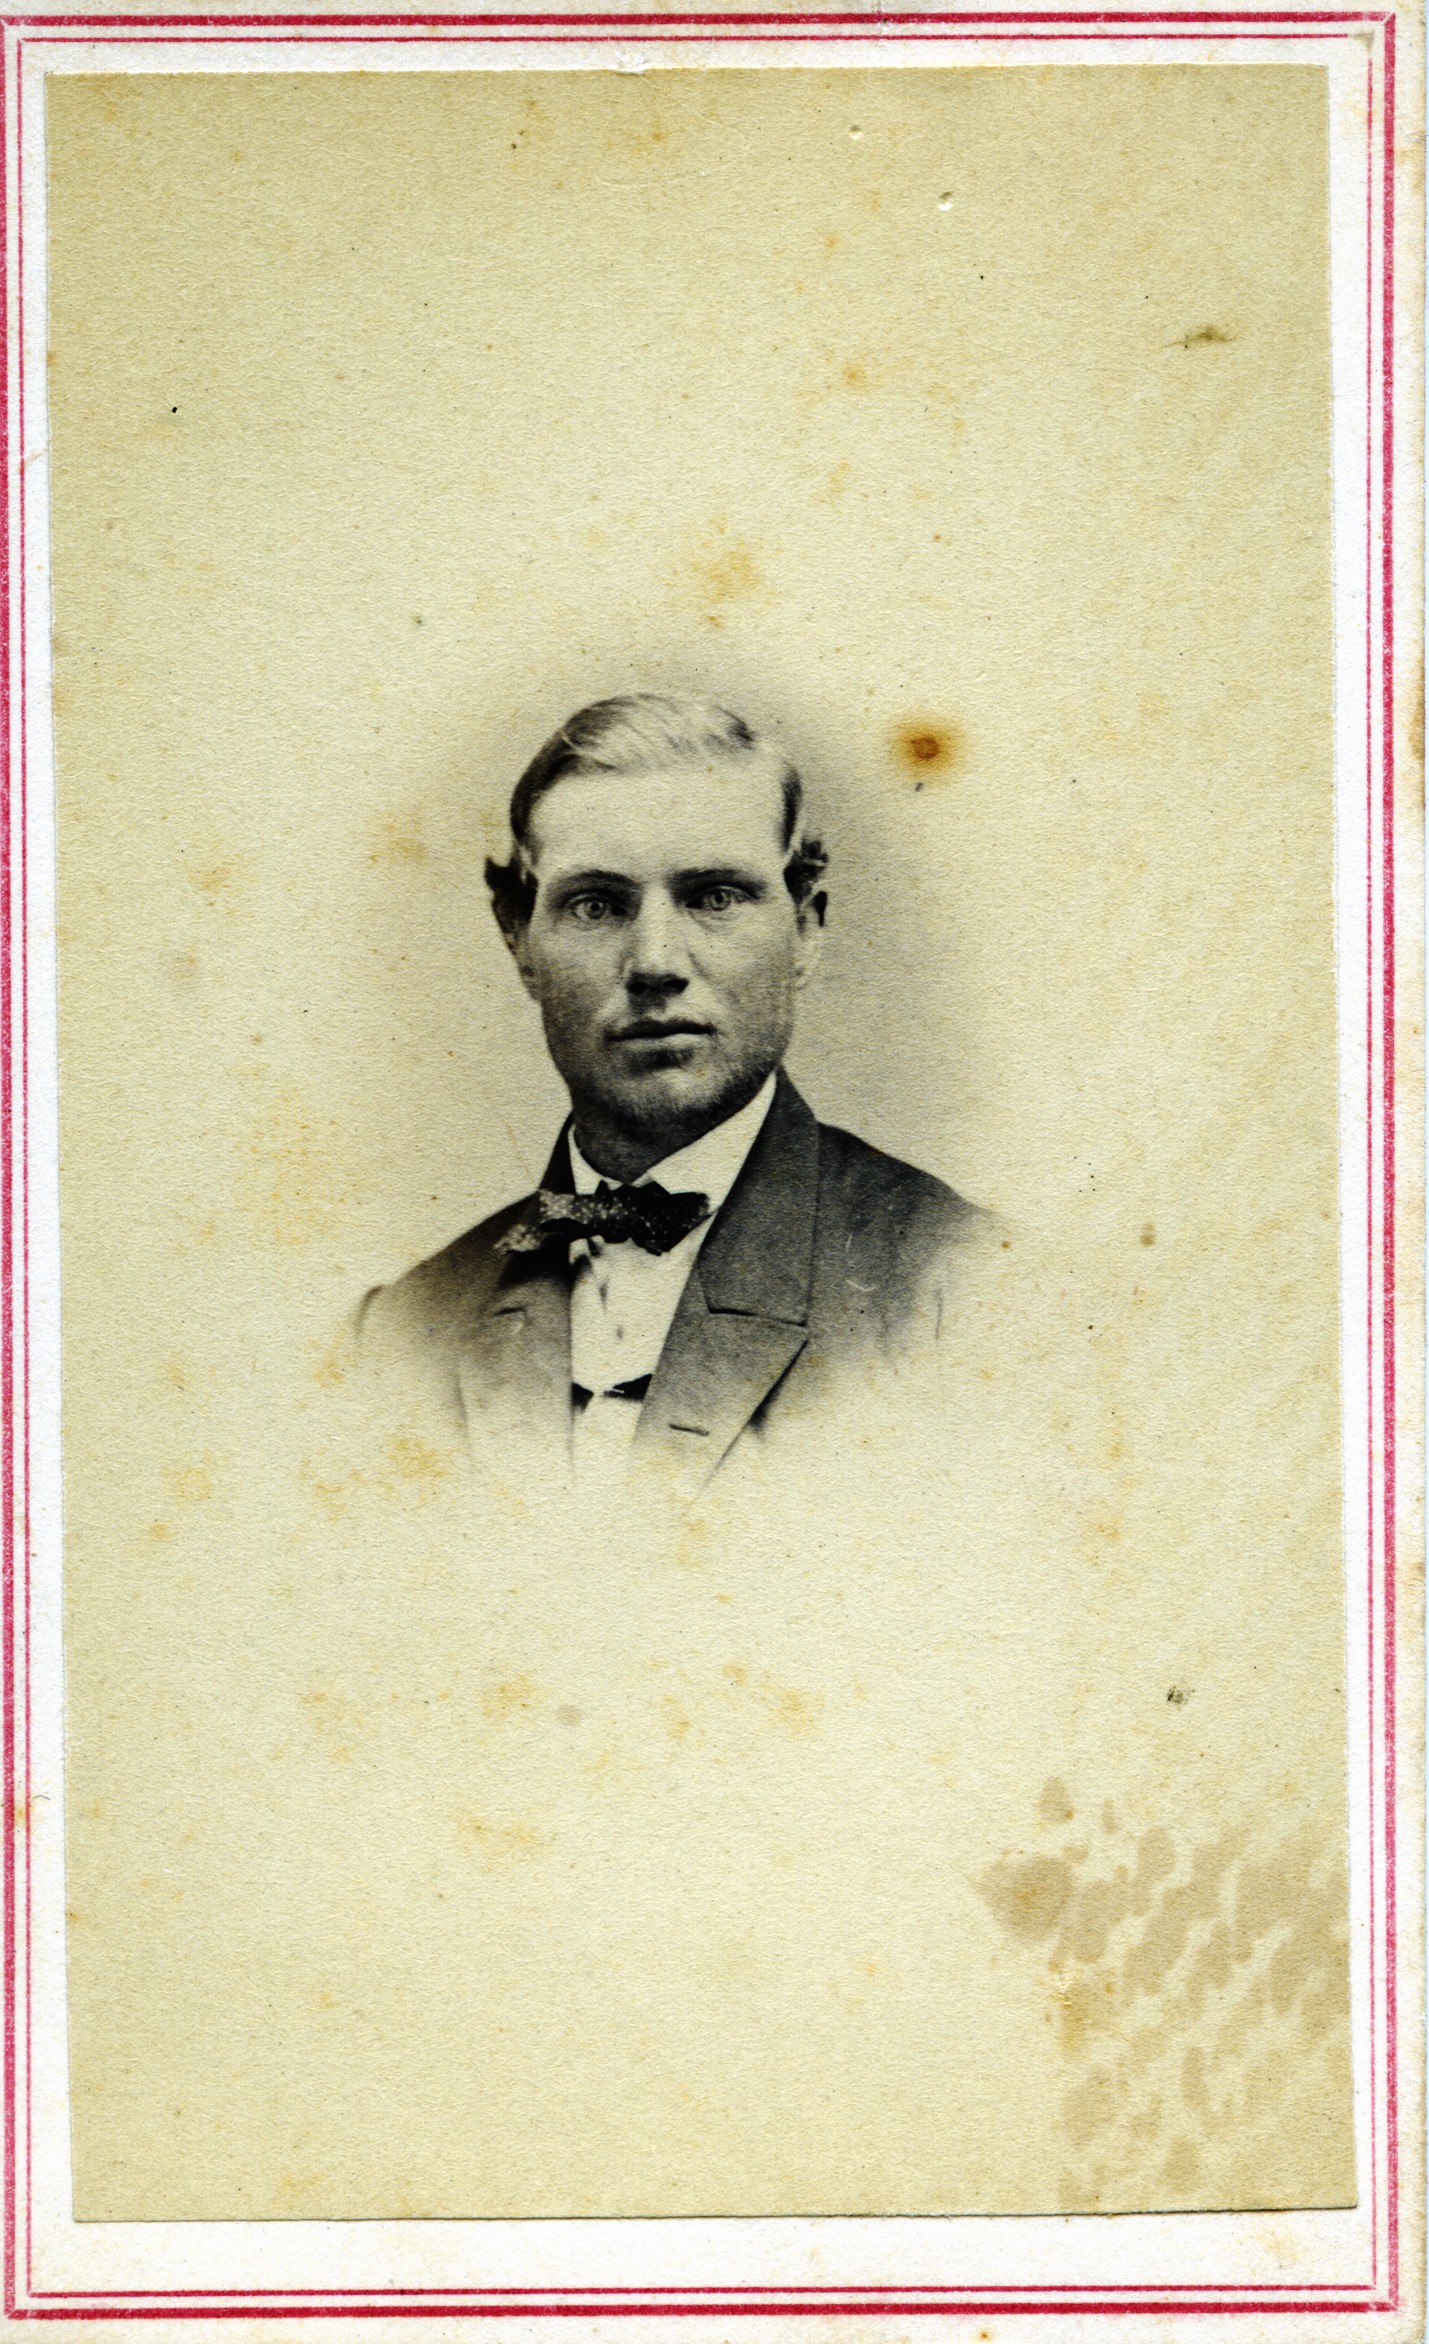 a vintage portrait of a man with a bow tie